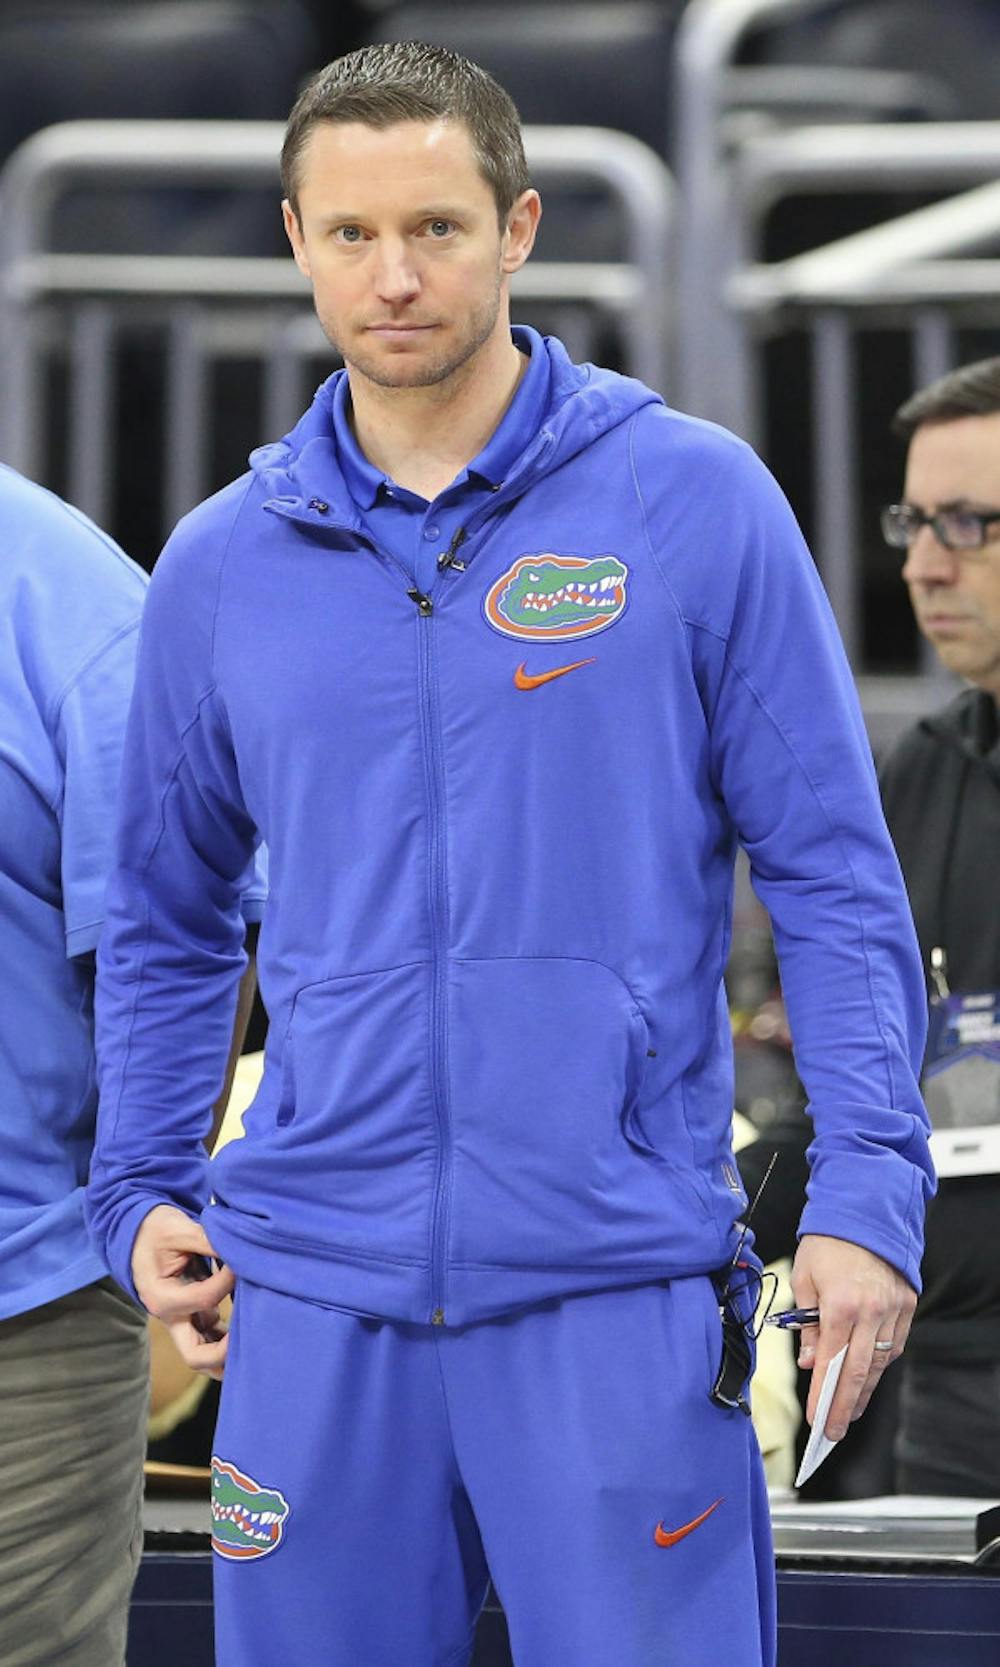 <p>Florida head coach Mike White looks on during a practice session for the NCAA March Madness Tournament at the Amway Center in Orlando, Fla. on Wednesday, March 15, 2017. (Stephen M. Dowell/Orlando Sentinel via AP)</p>